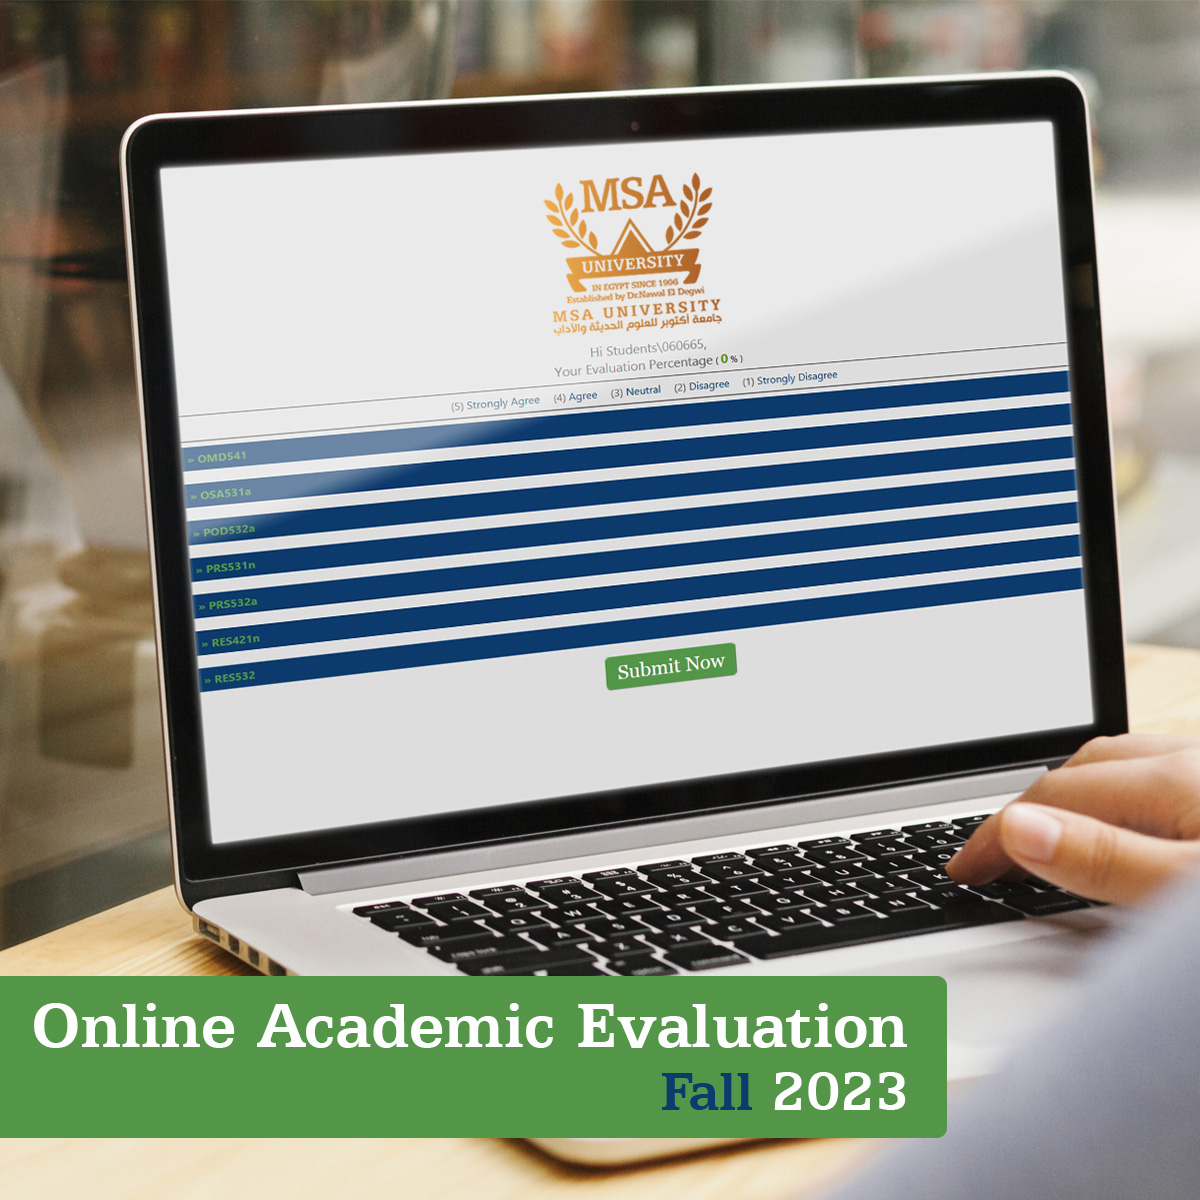 Online Academic Evaluation - Fall 2023